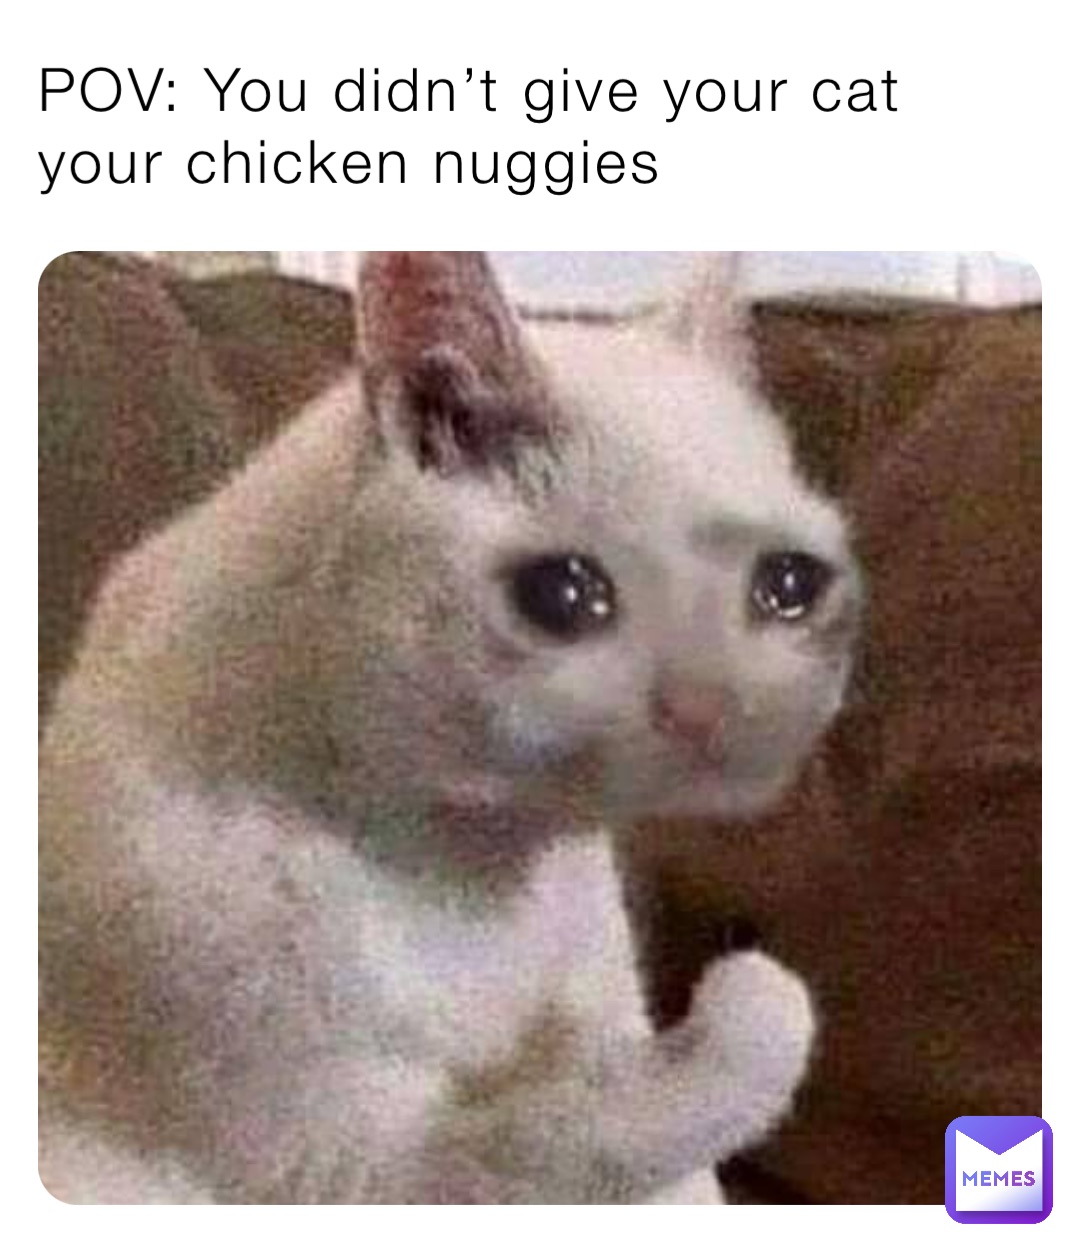 POV: You didn’t give your cat your chicken nuggies